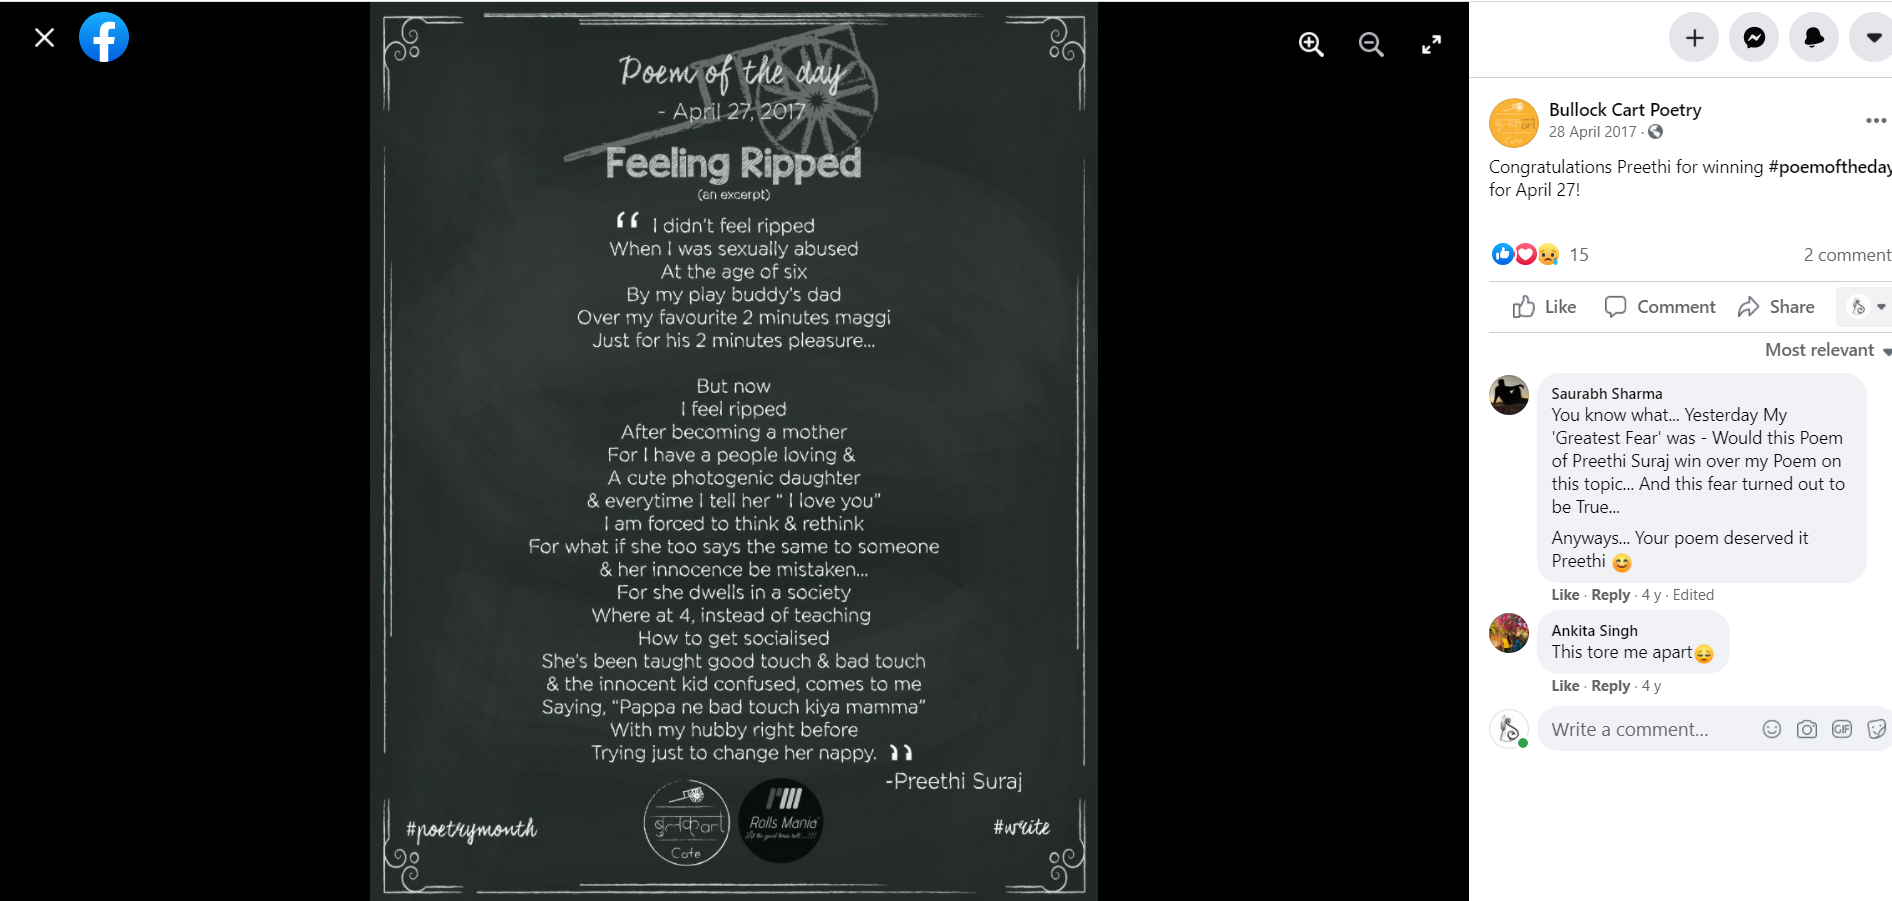 Author's poetry excerpt from poem titled "Feeling Ripped" 